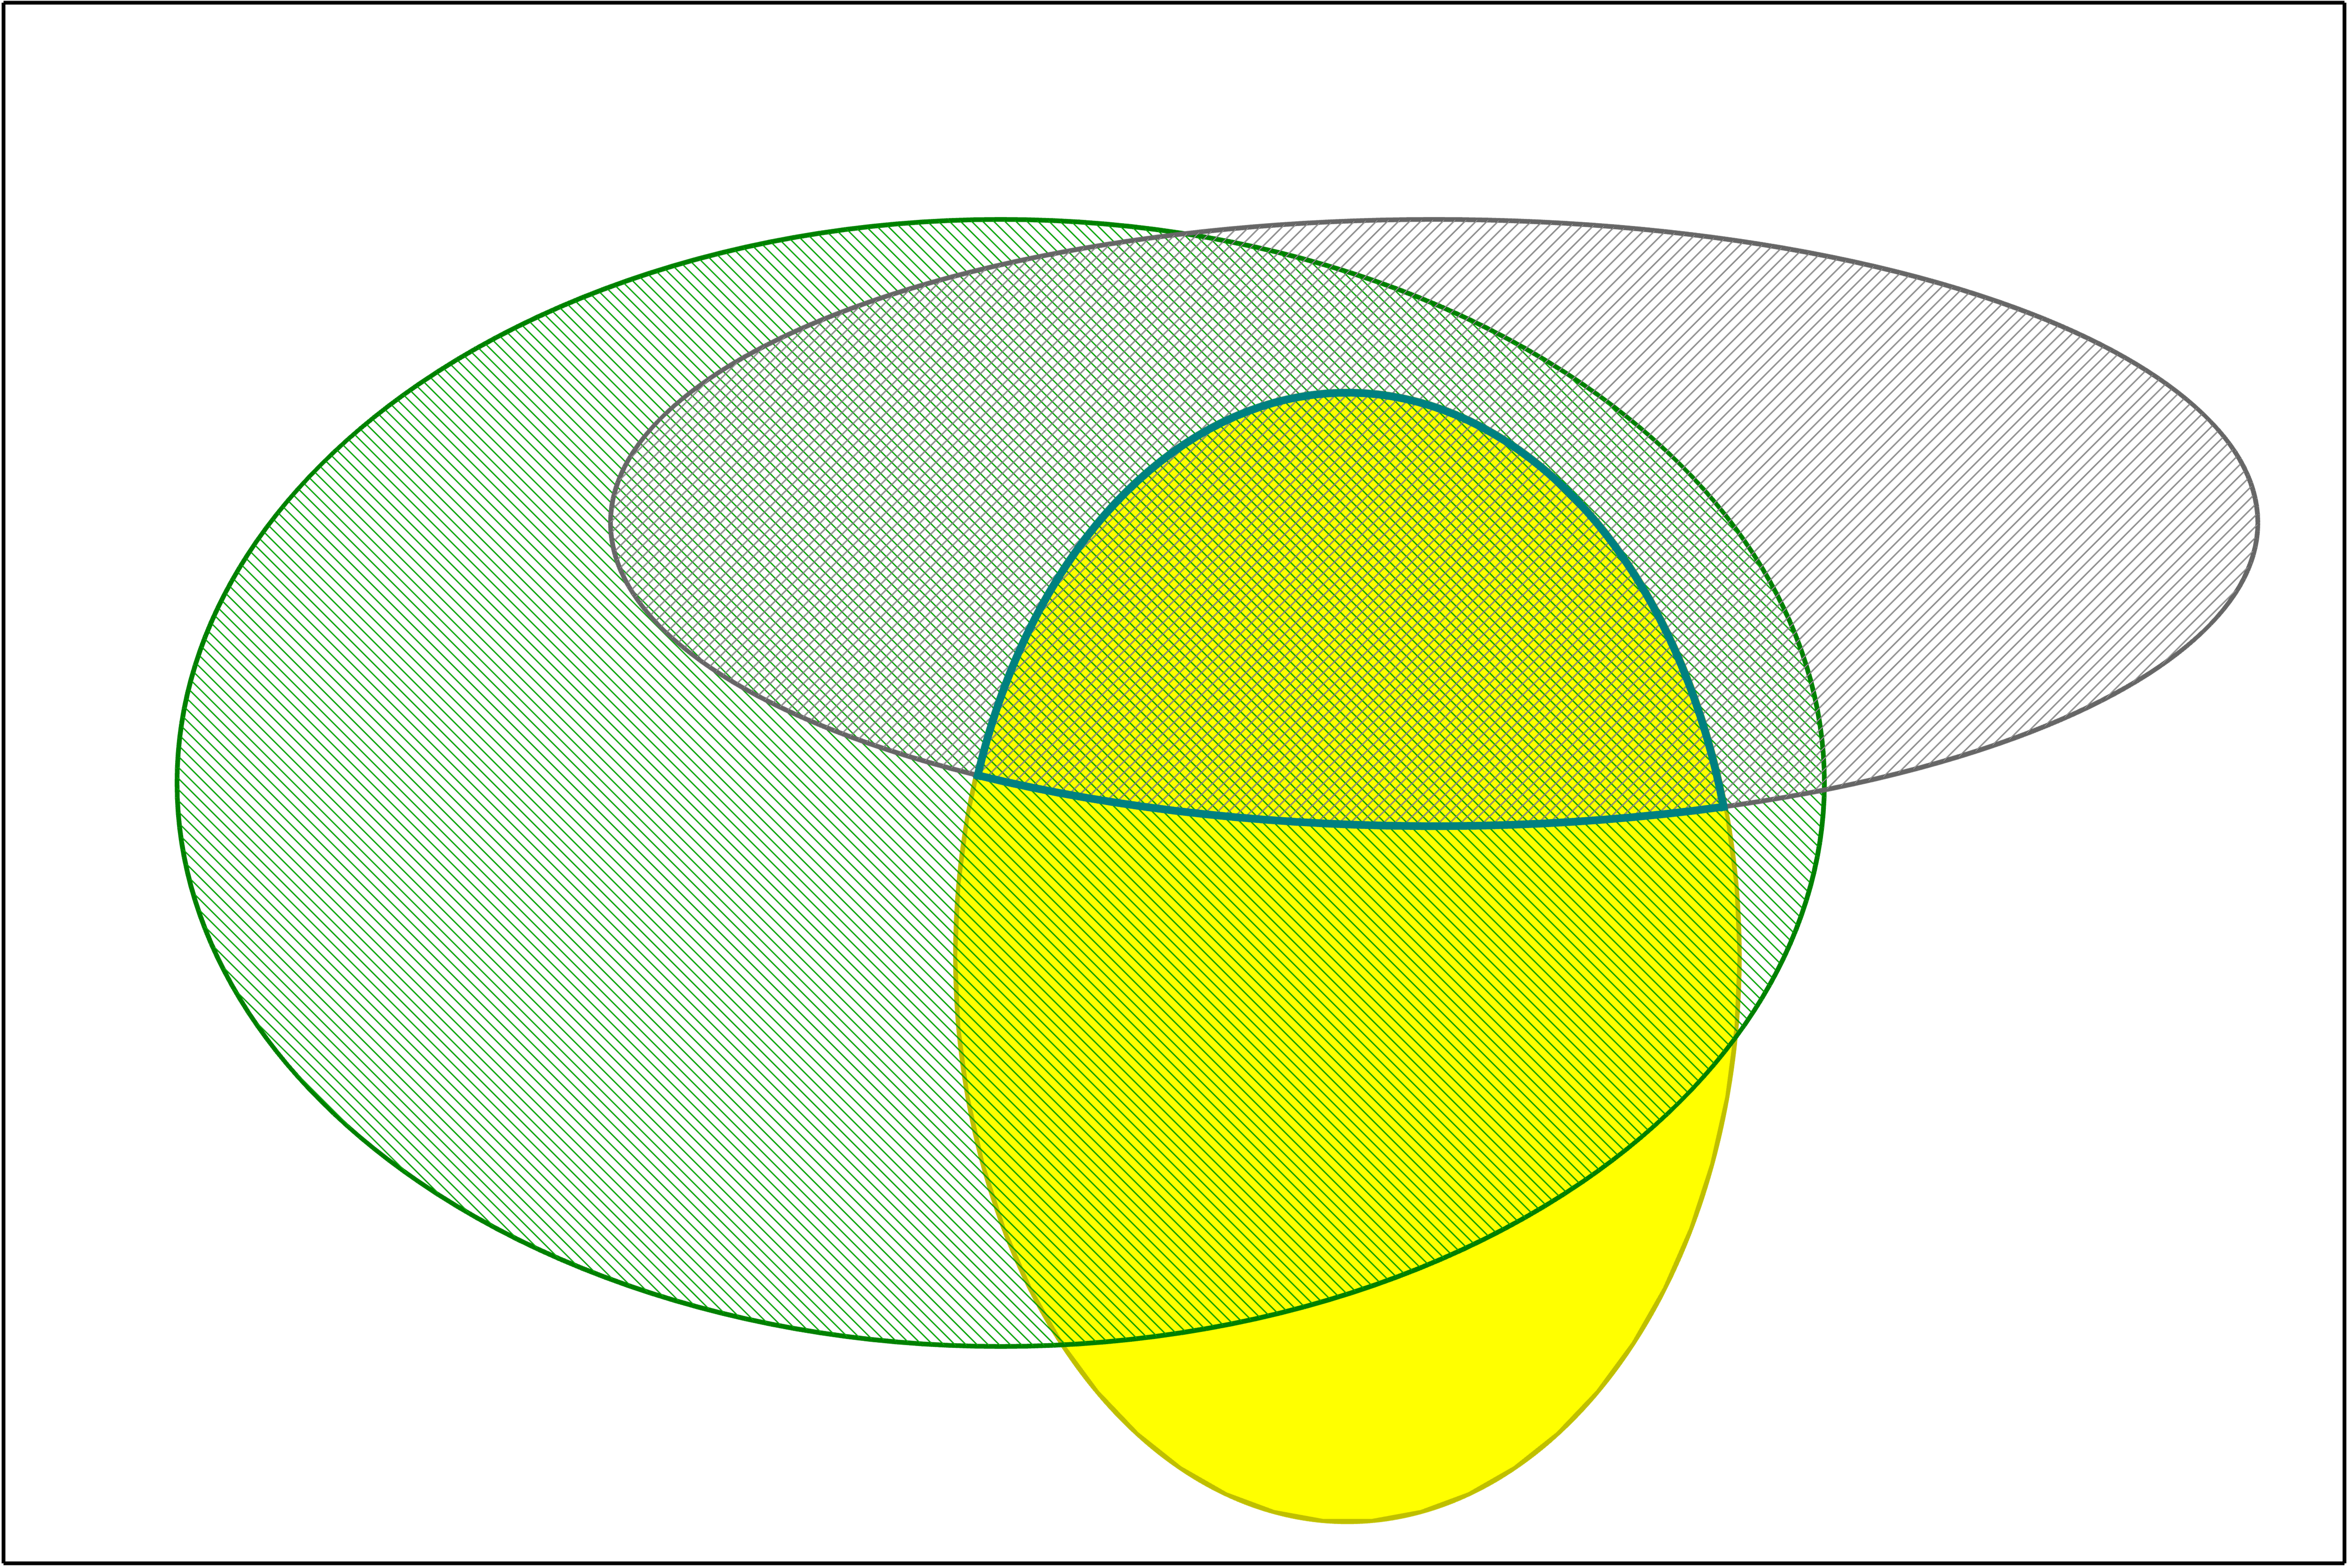 Visualization of a partial contrapositive.